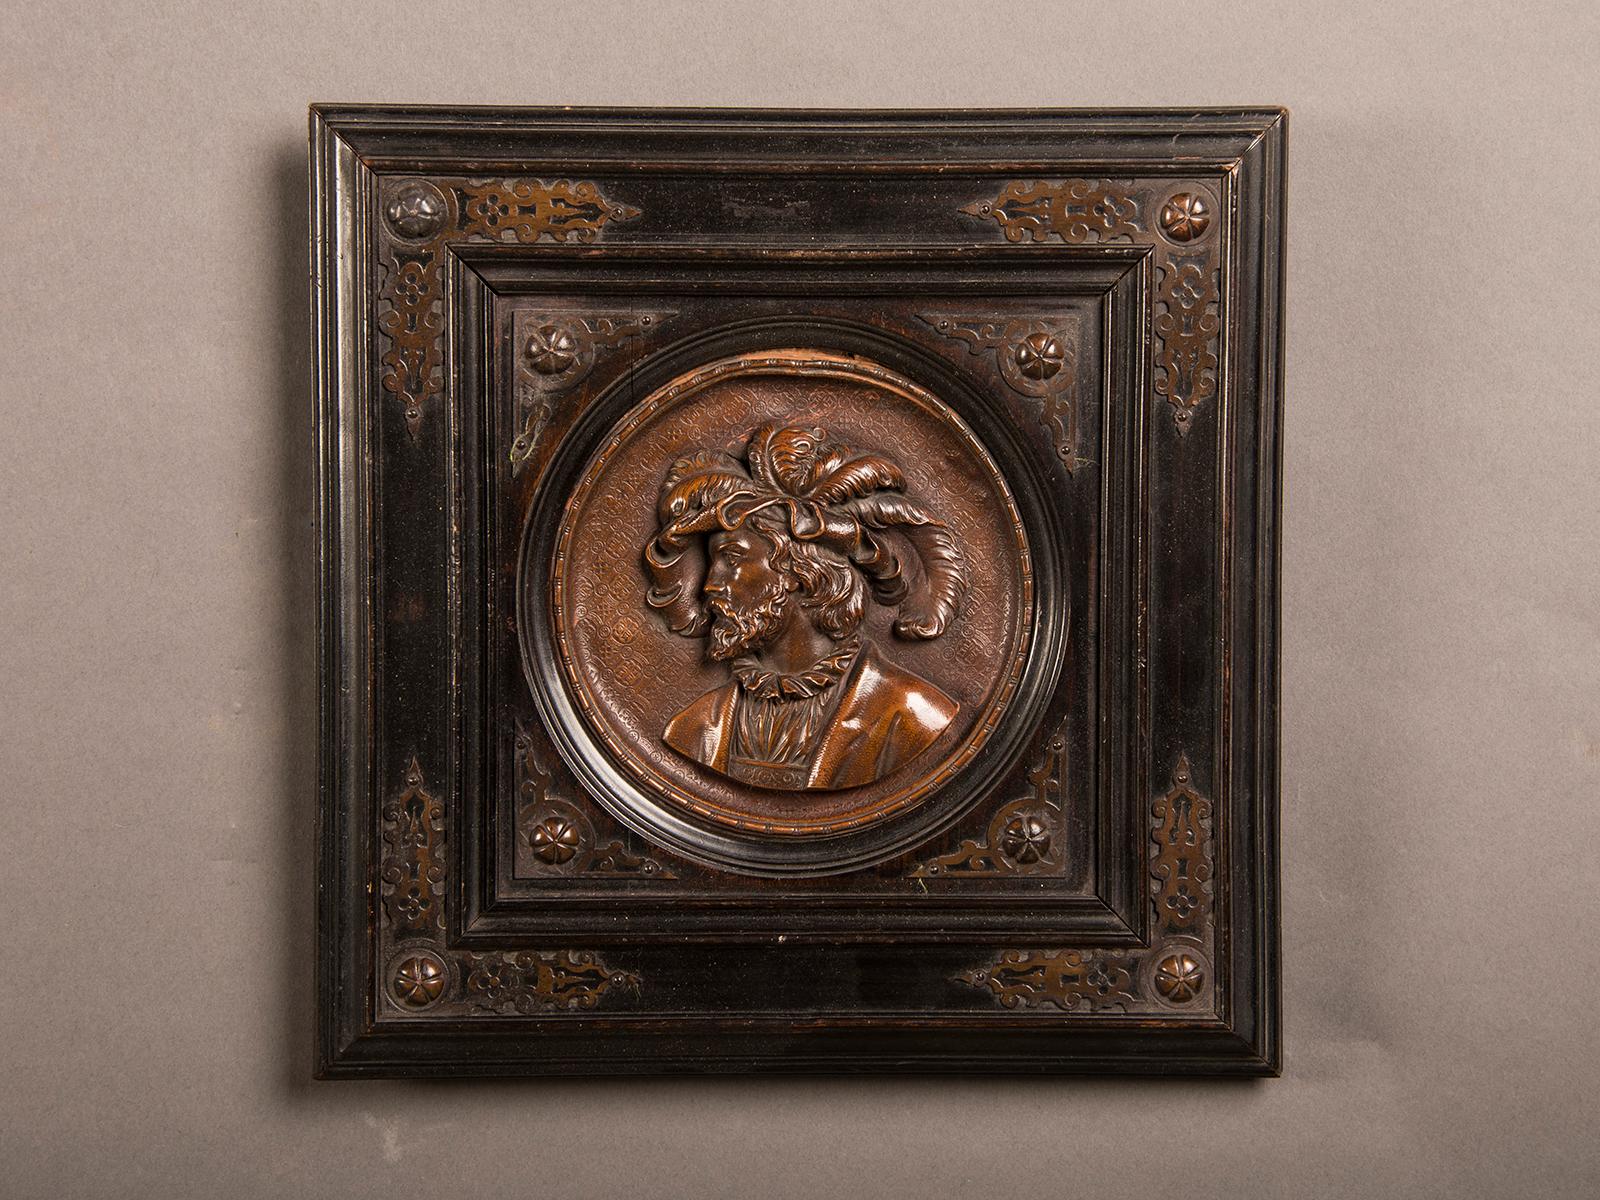 A pair of antique Italian Renaissance style cameo portraits from Italy circa 1865 featuring the bust of a lady and a gentleman rendered in bronze and inset into a square frame. Please notice that these two pieces were always meant to be seen as a